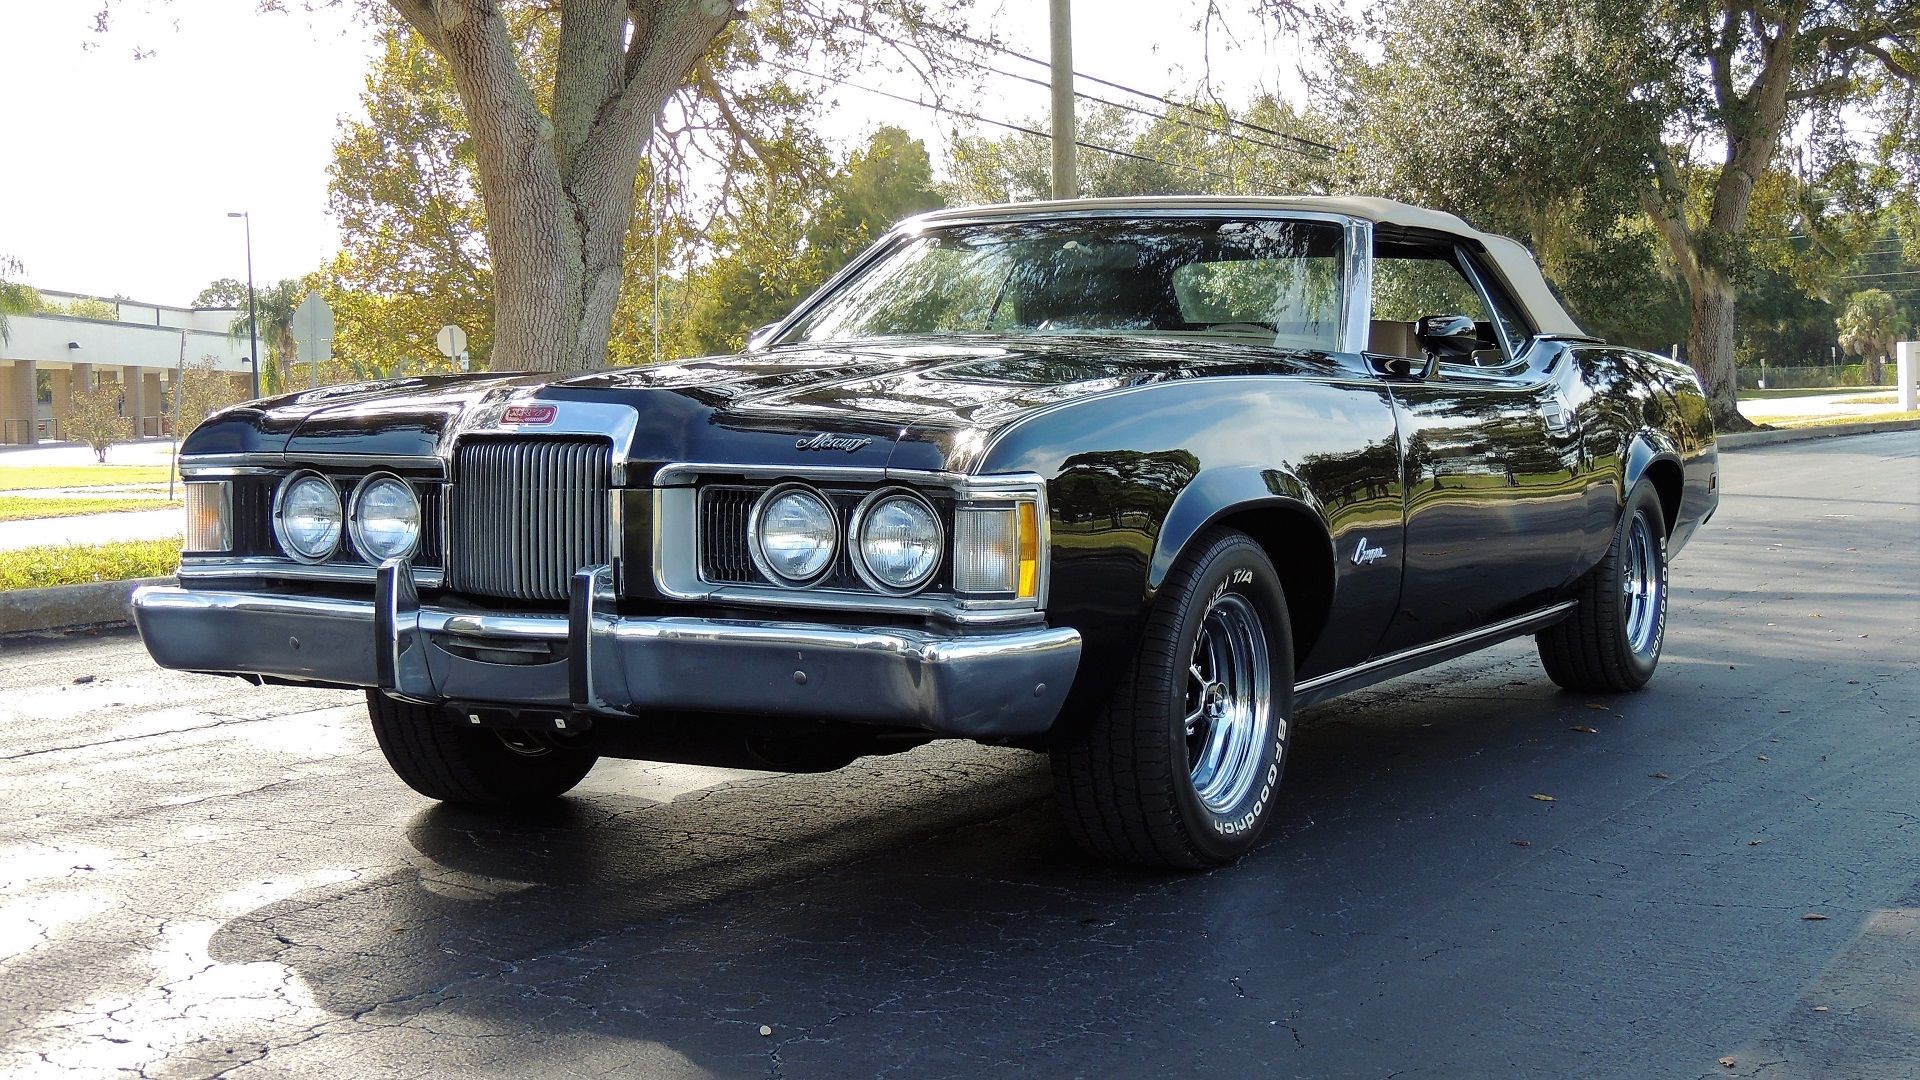 A parked 1973 Mercury Cougar